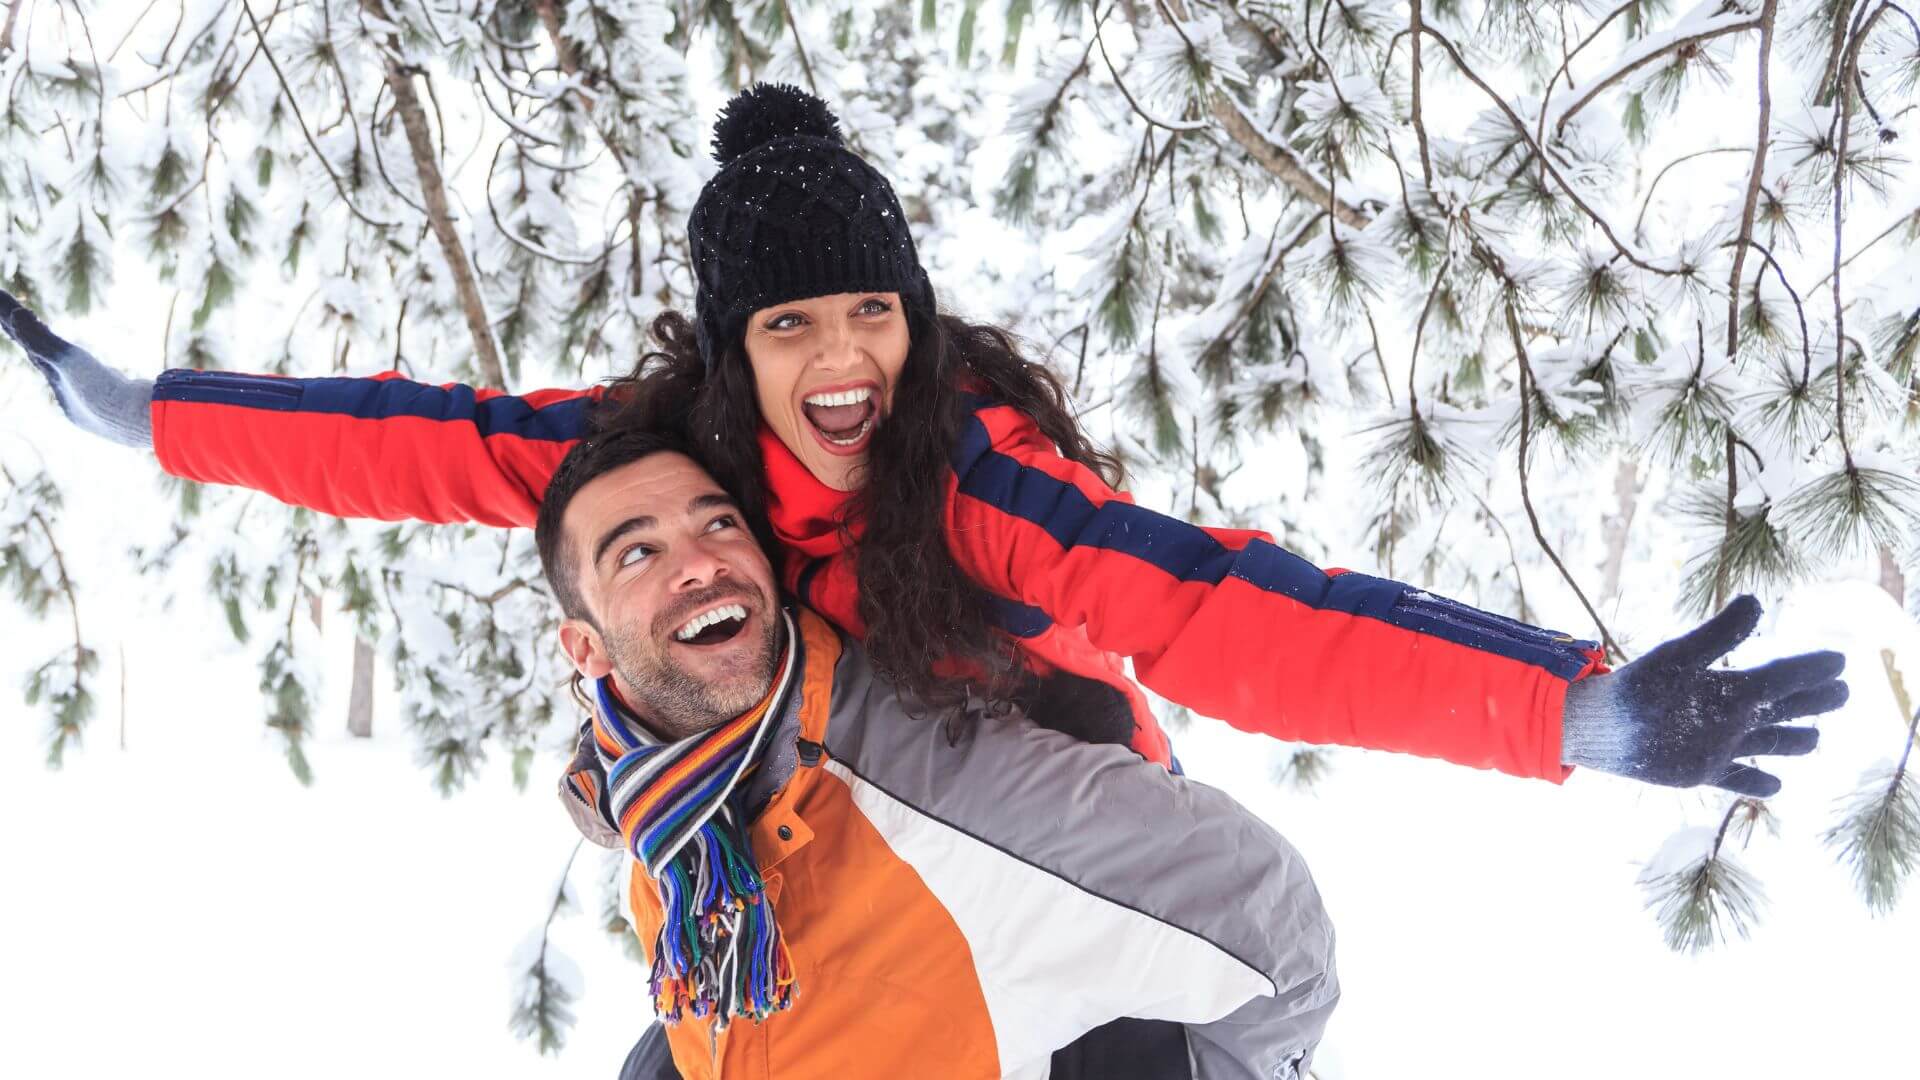 Smiling woman in red and blue coat riding piggy back on smiling man in orange, gray and white coat standing in snow under evergreen trees